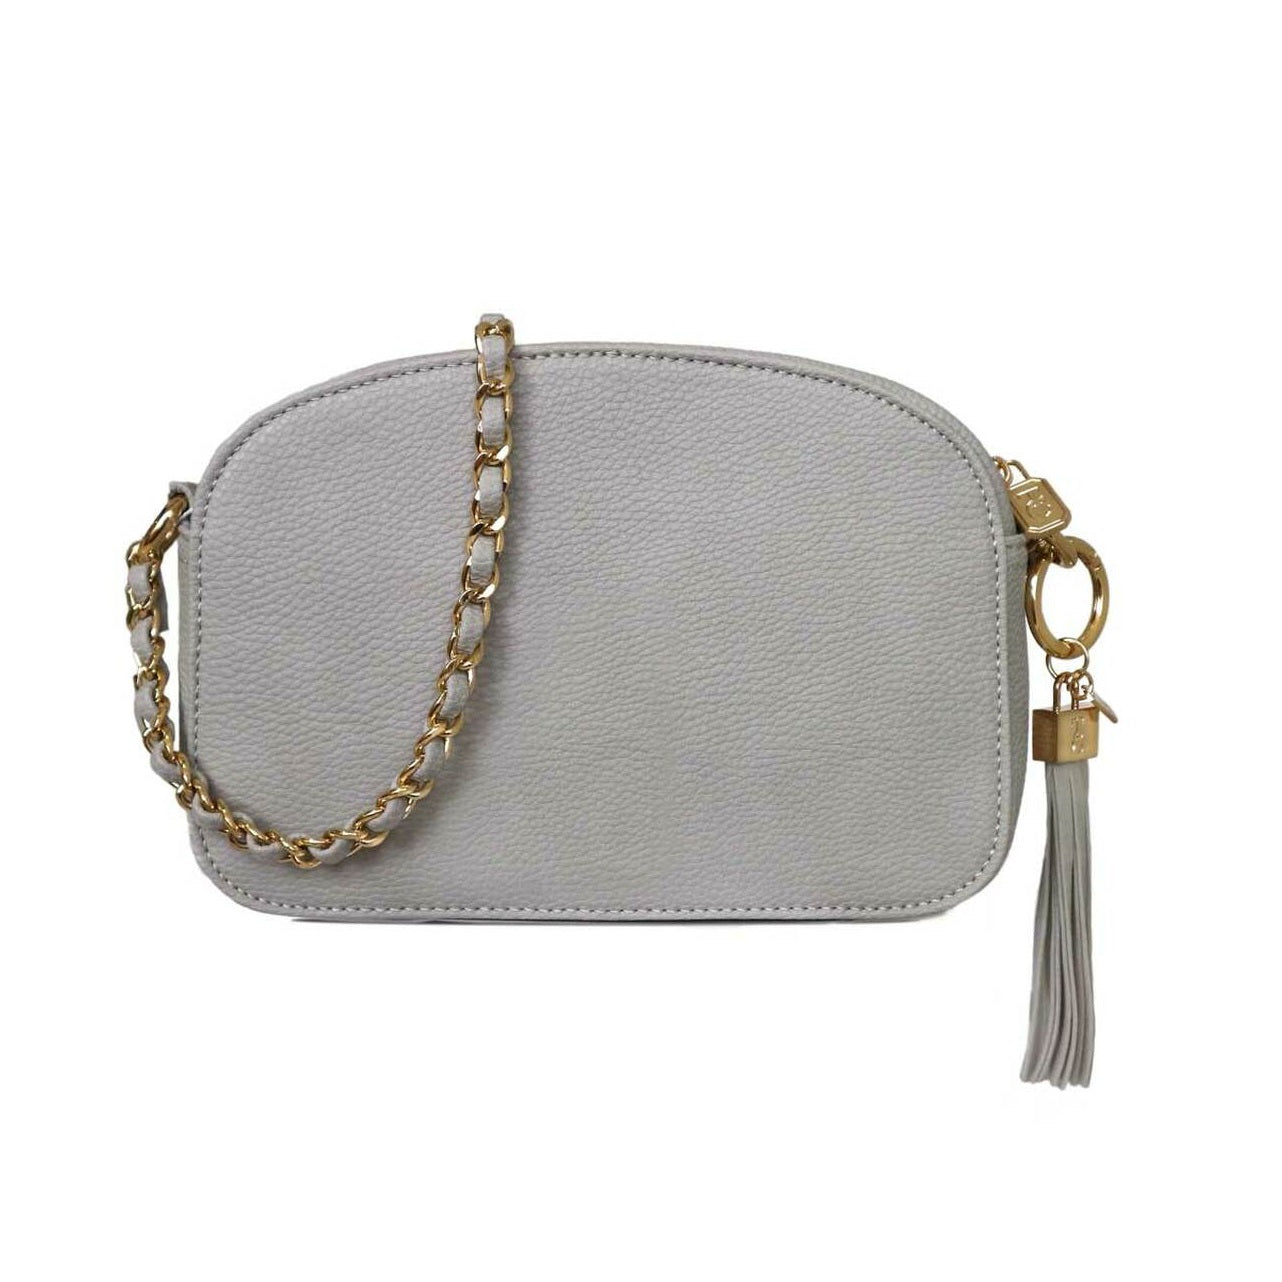 Tipperary Crystal The Cannes Shoulder Bag Grey